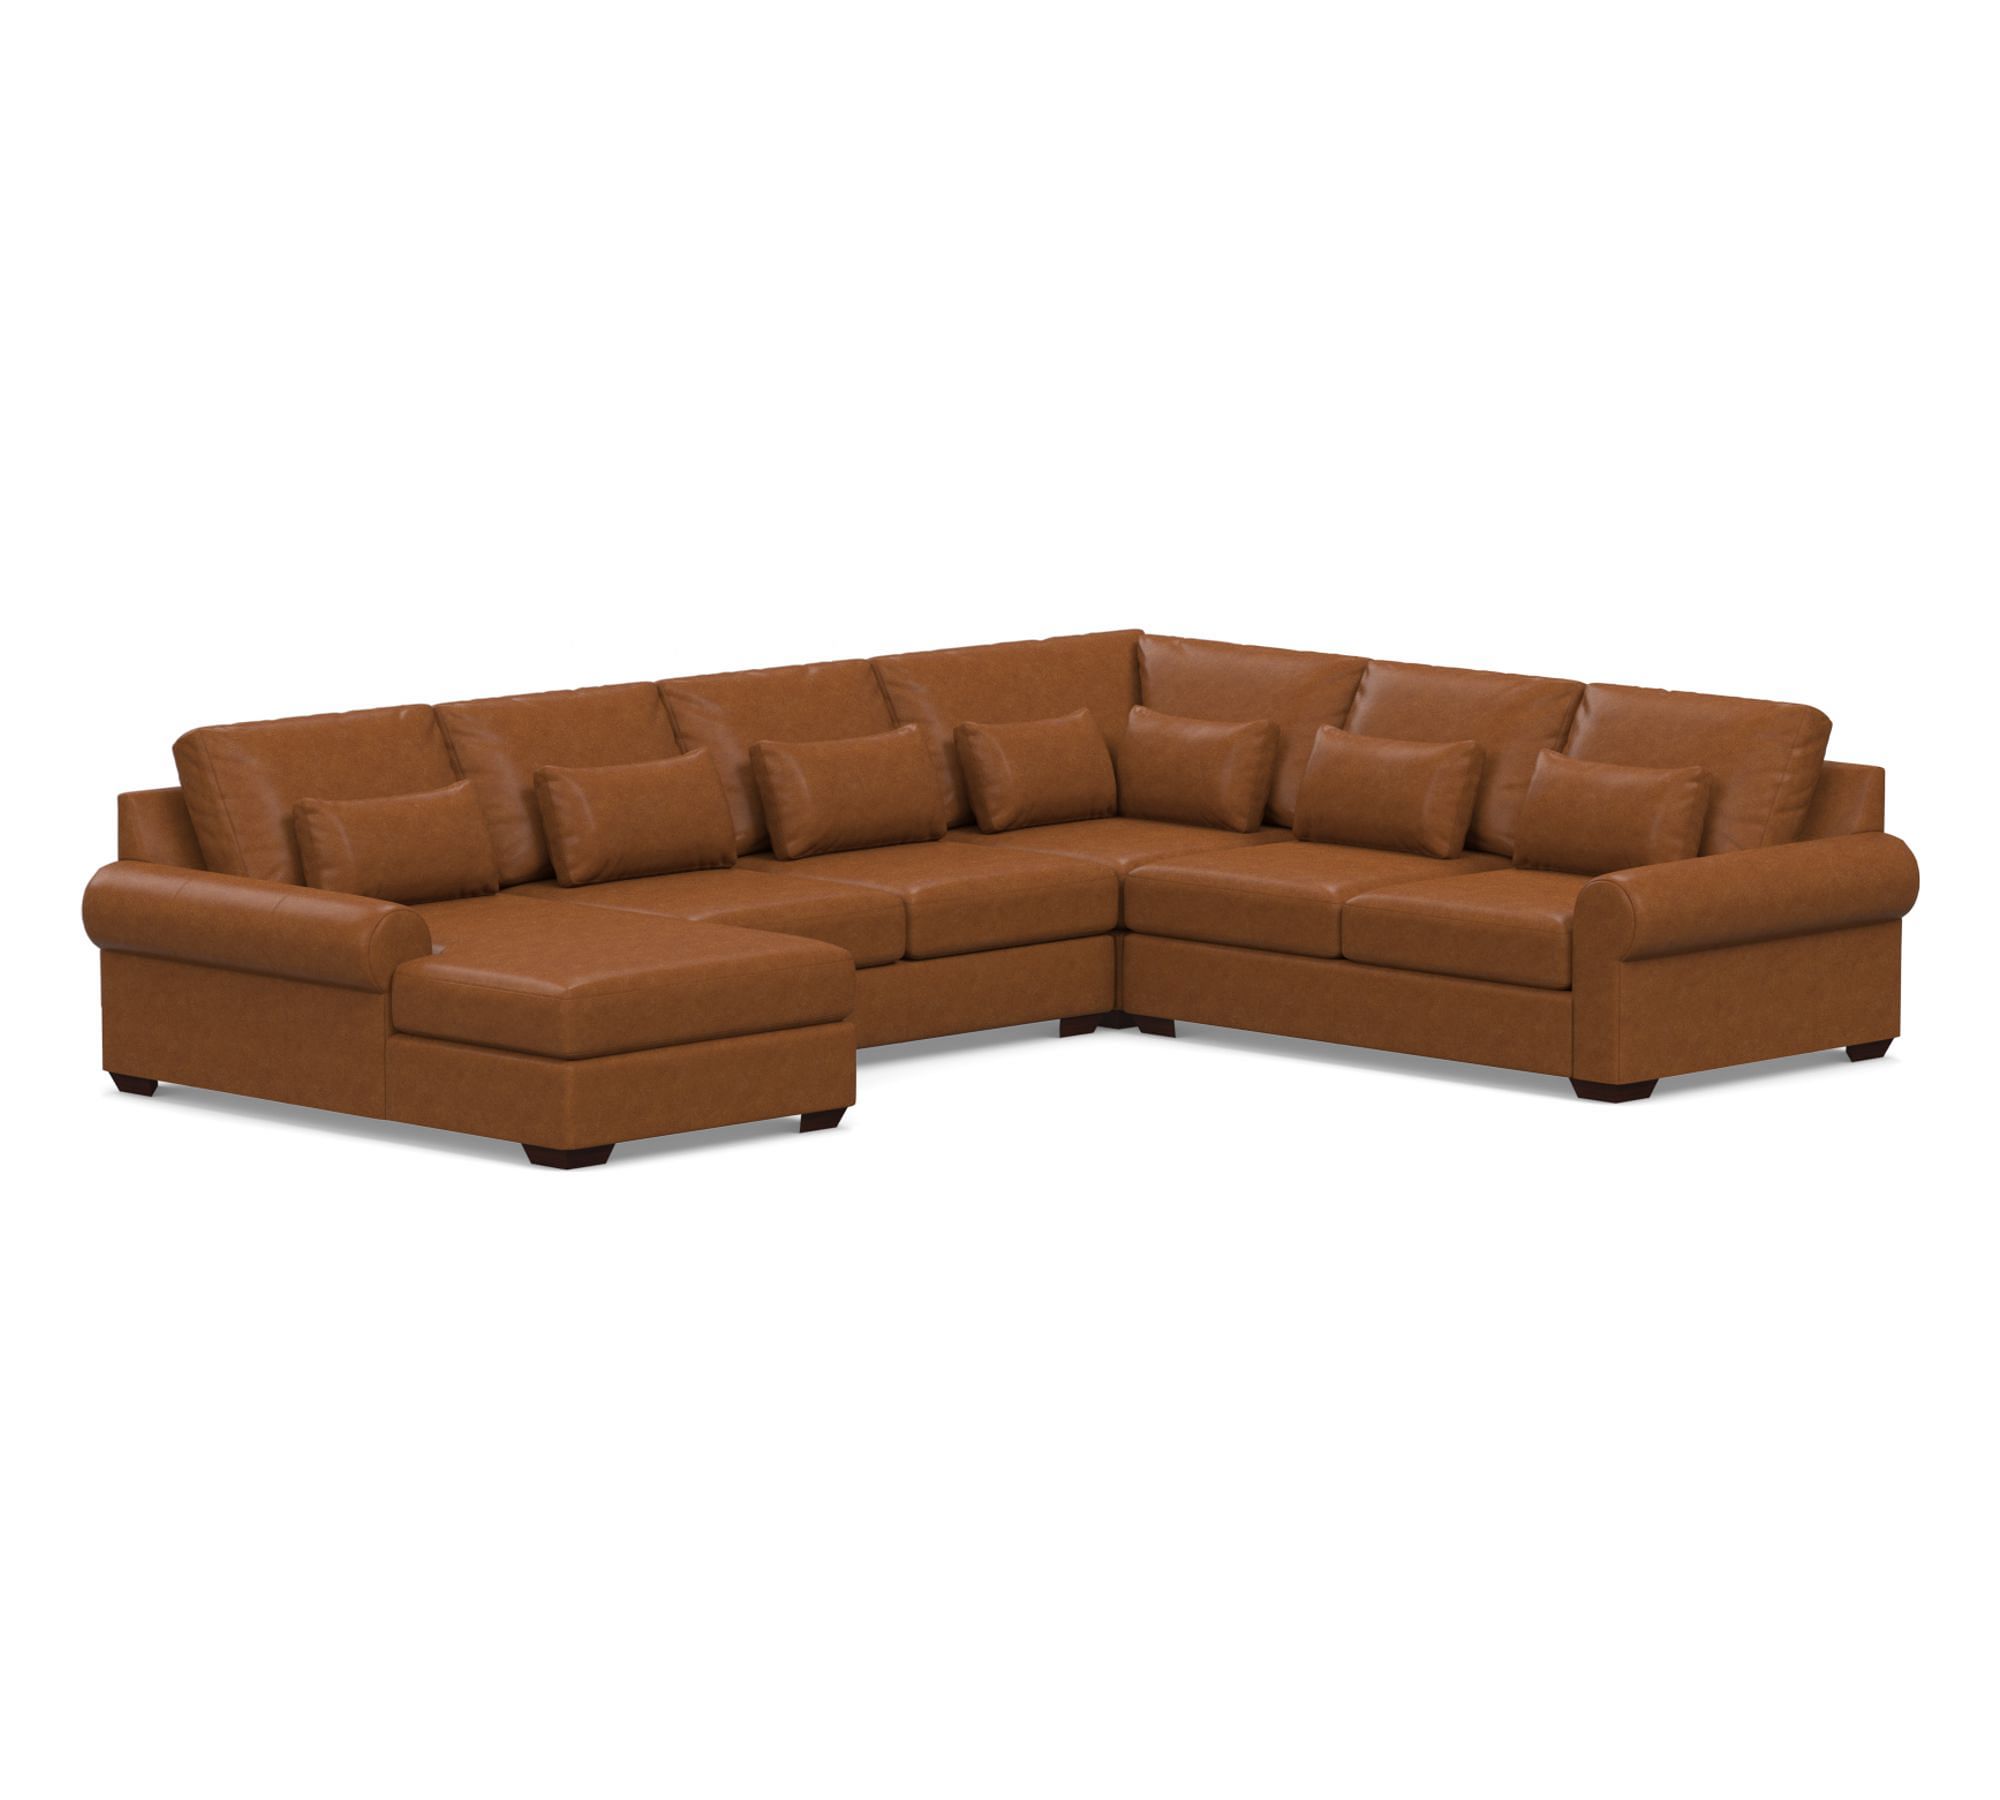 Big Sur Roll Arm Deep Seat Leather 4-Piece Chaise Sectional (151")